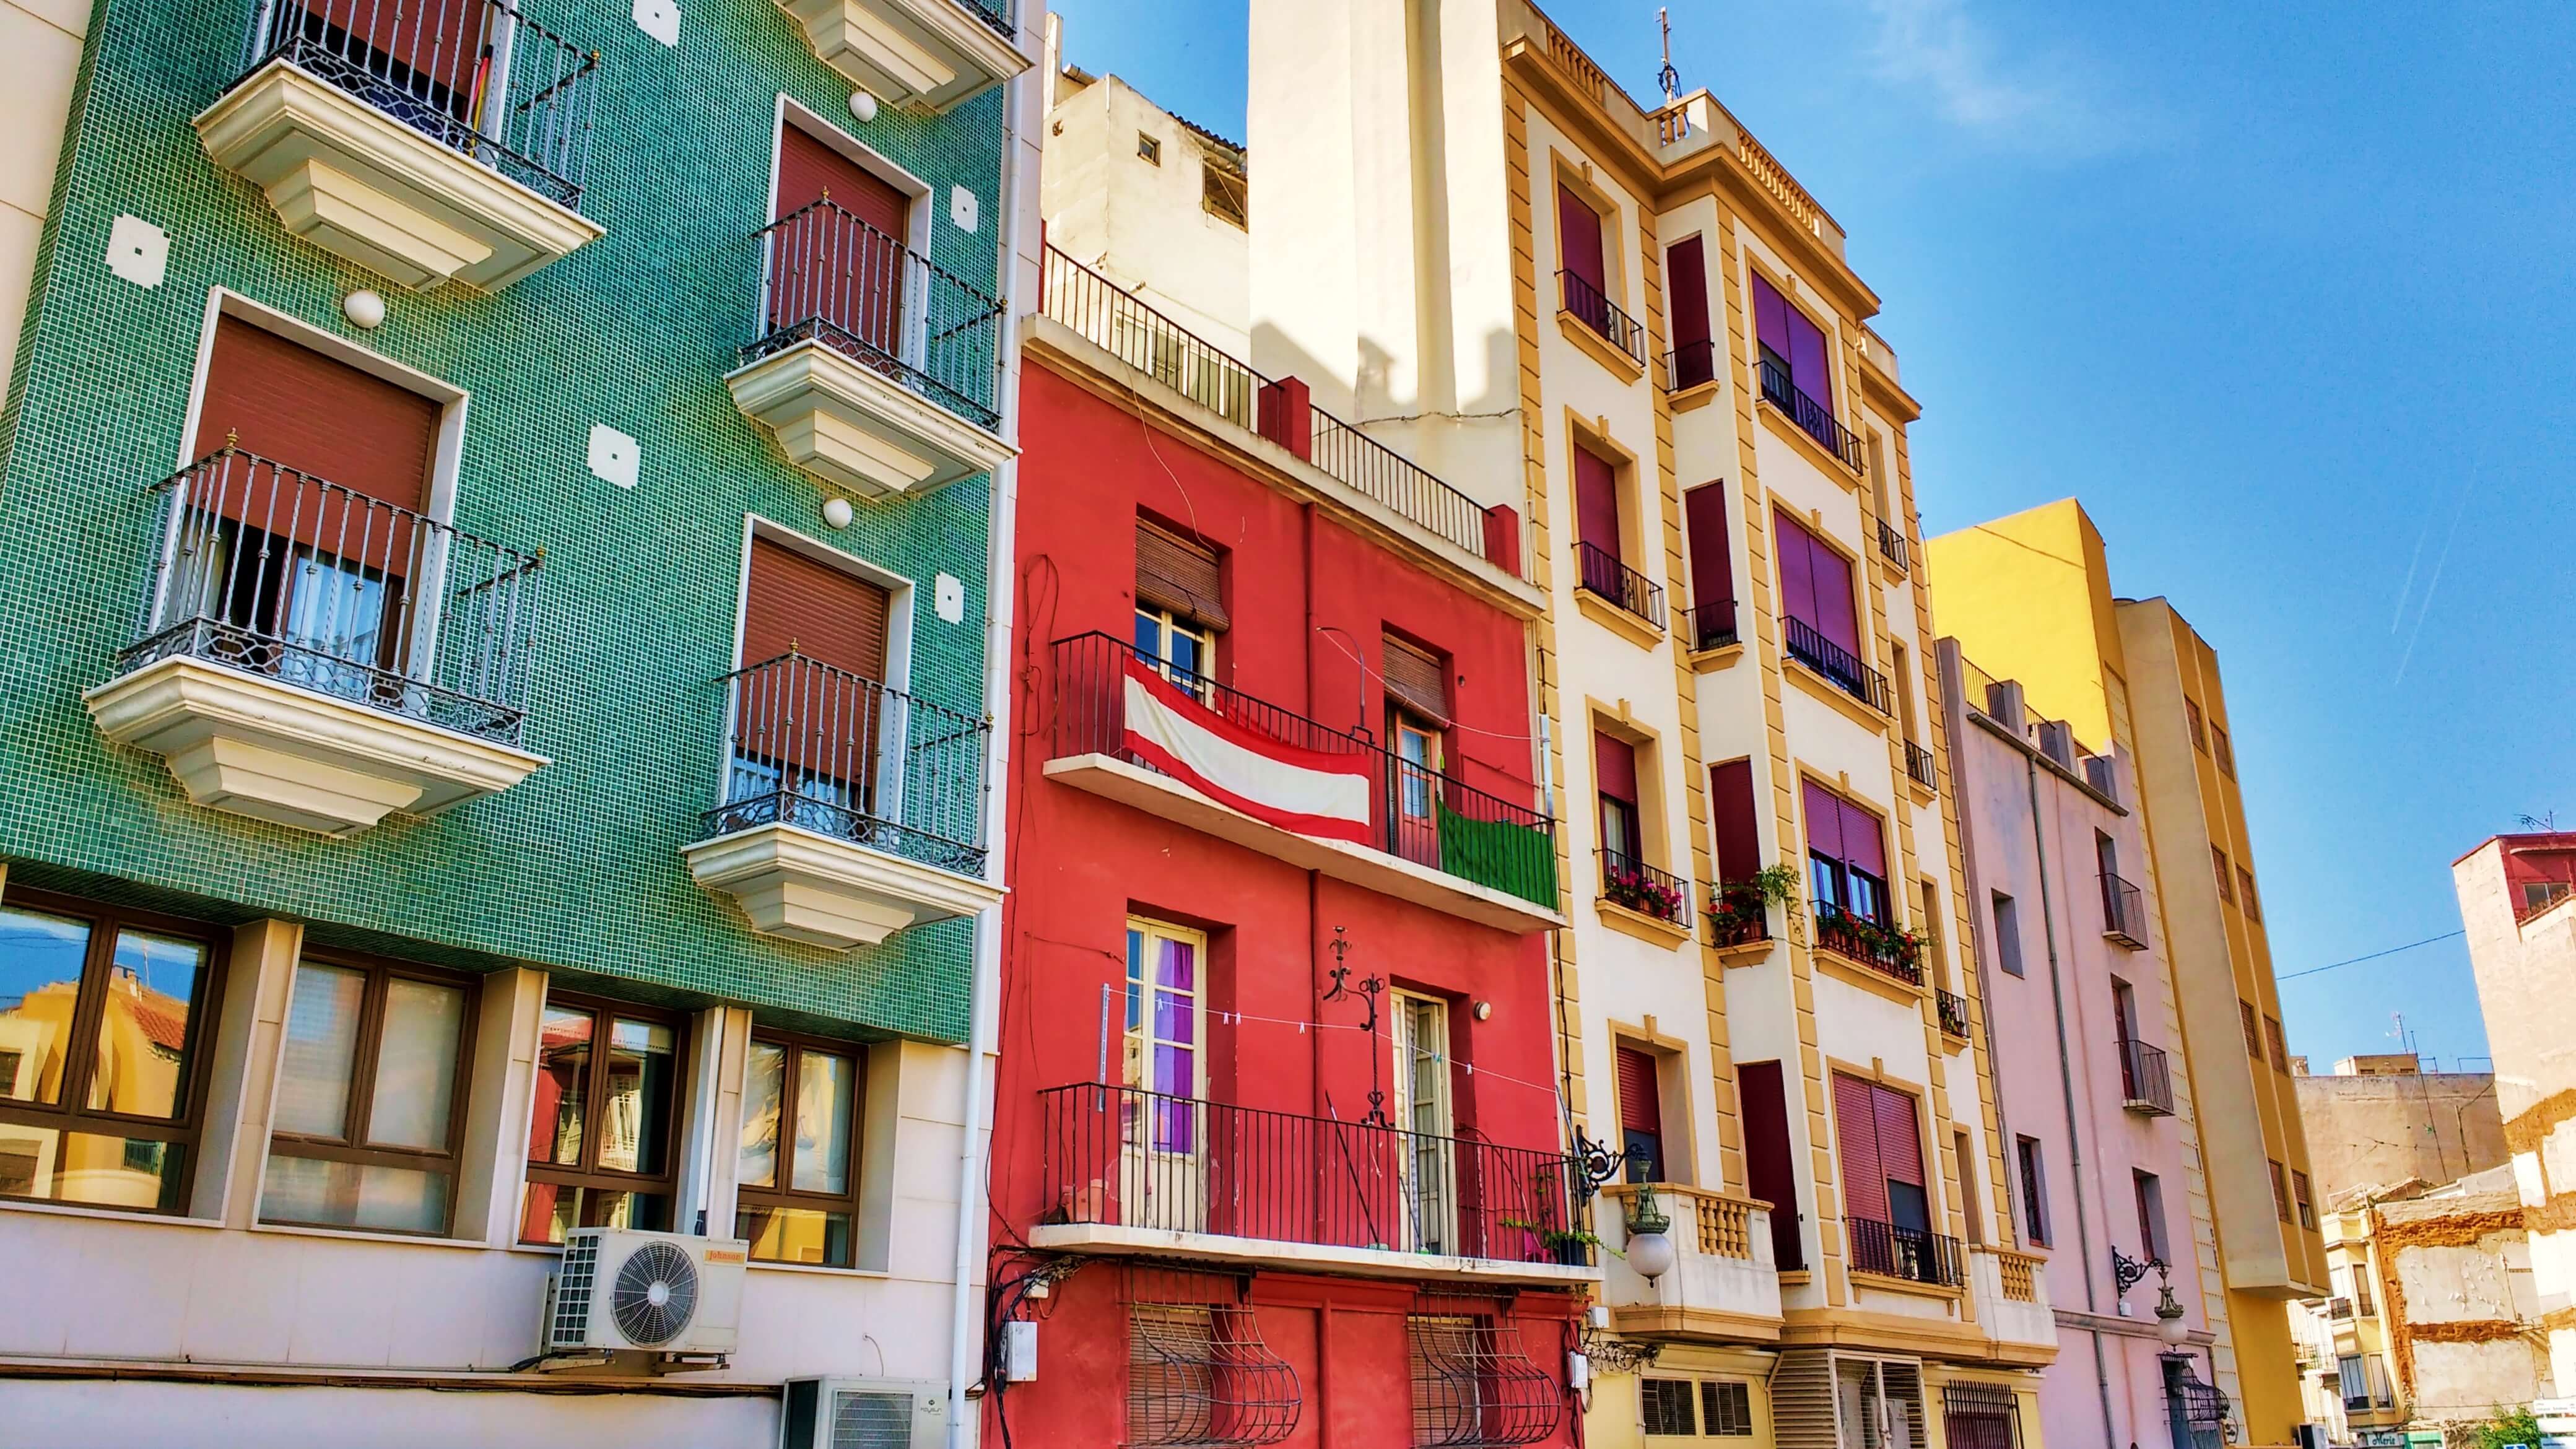 A row of brightly coloured buildings